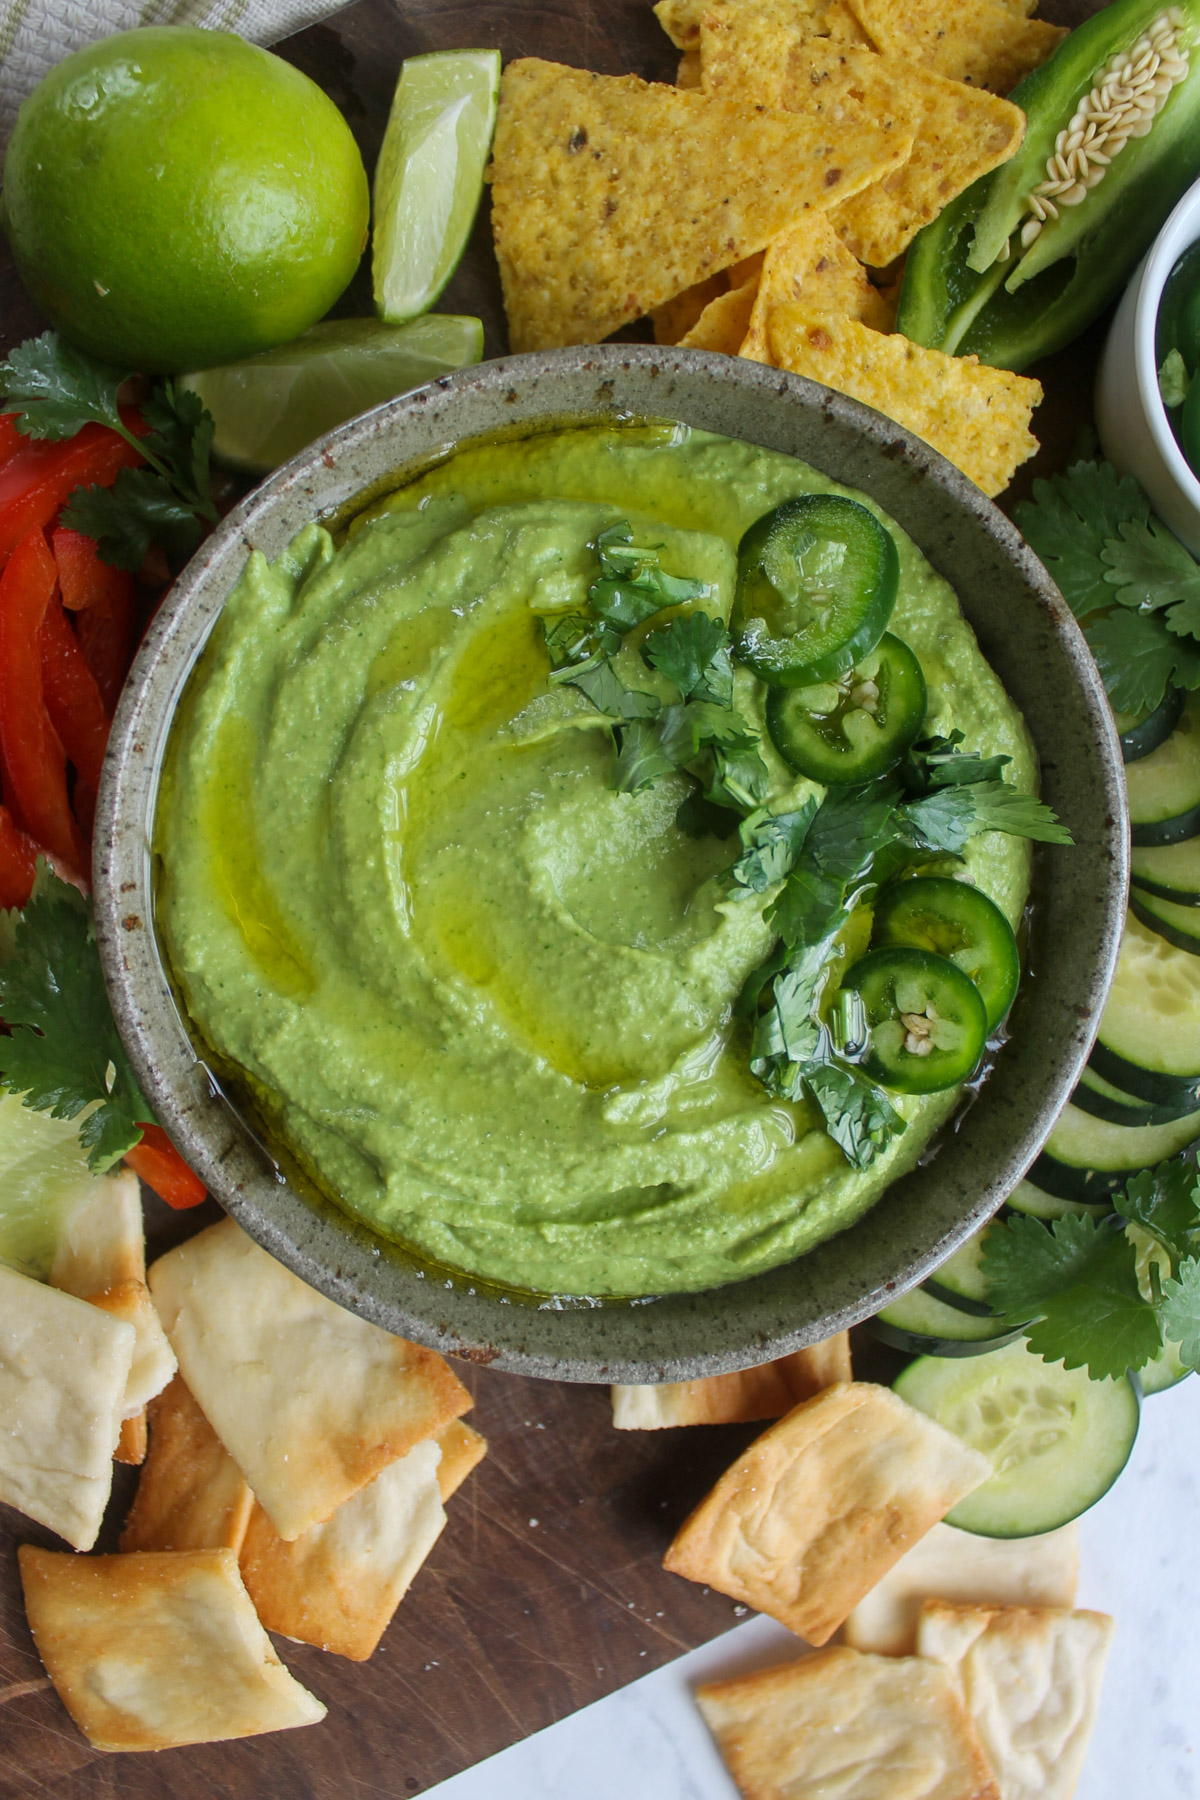 A bowl of cilantro lime hummus with pita crackers and veggies.